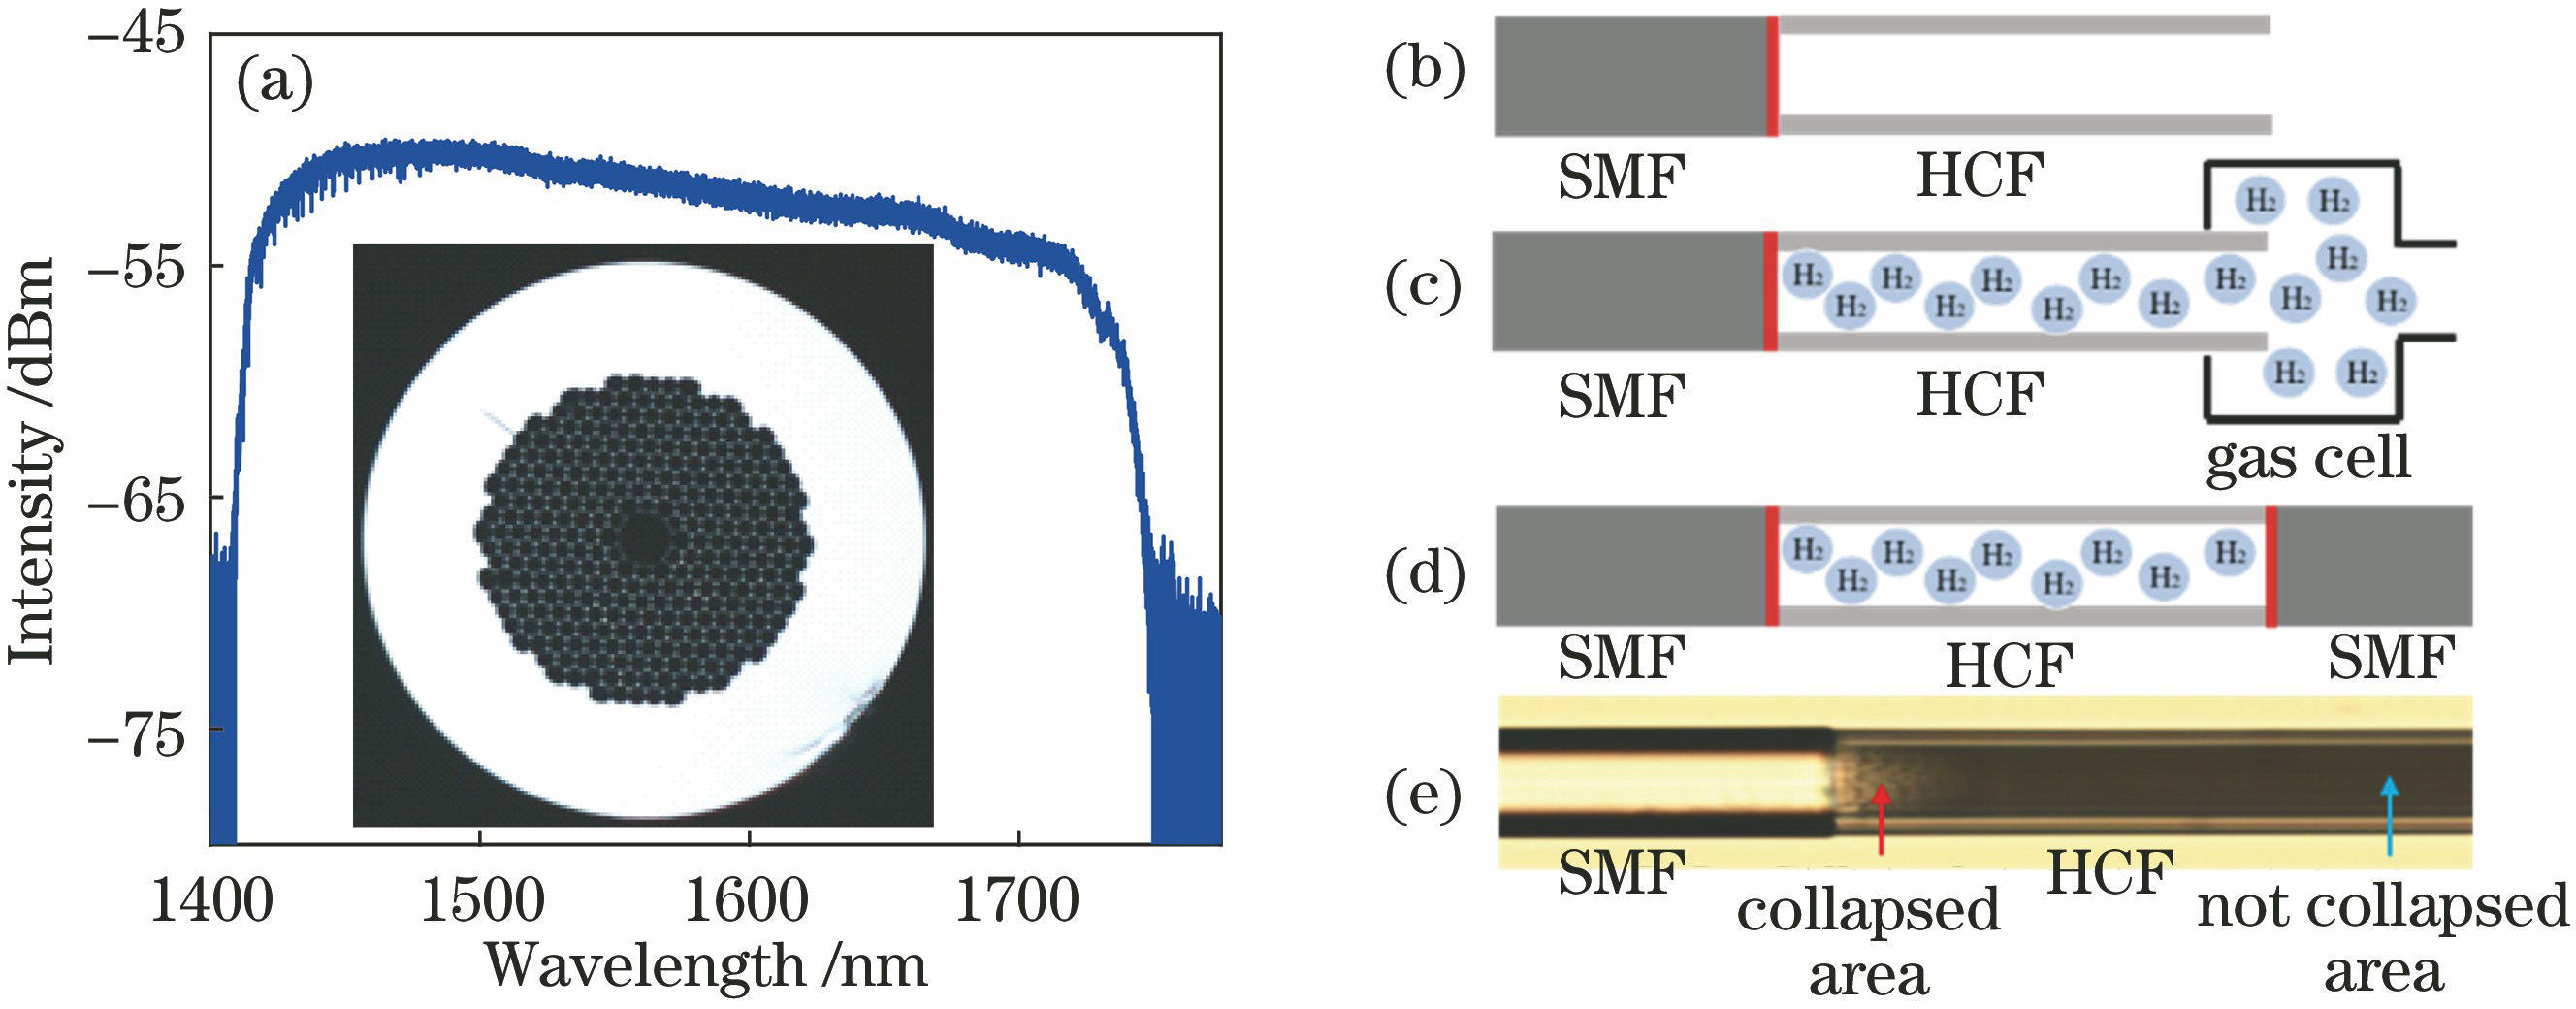 Experimental results. (a) Measured transmission spectrum of the hollow-core fibers, insert is the micrograph of the hollow-core fibers’ cross section; (b)-(d) schematic of the all-fiber gas cell preparation process; (e) micrograph of fusion point 1